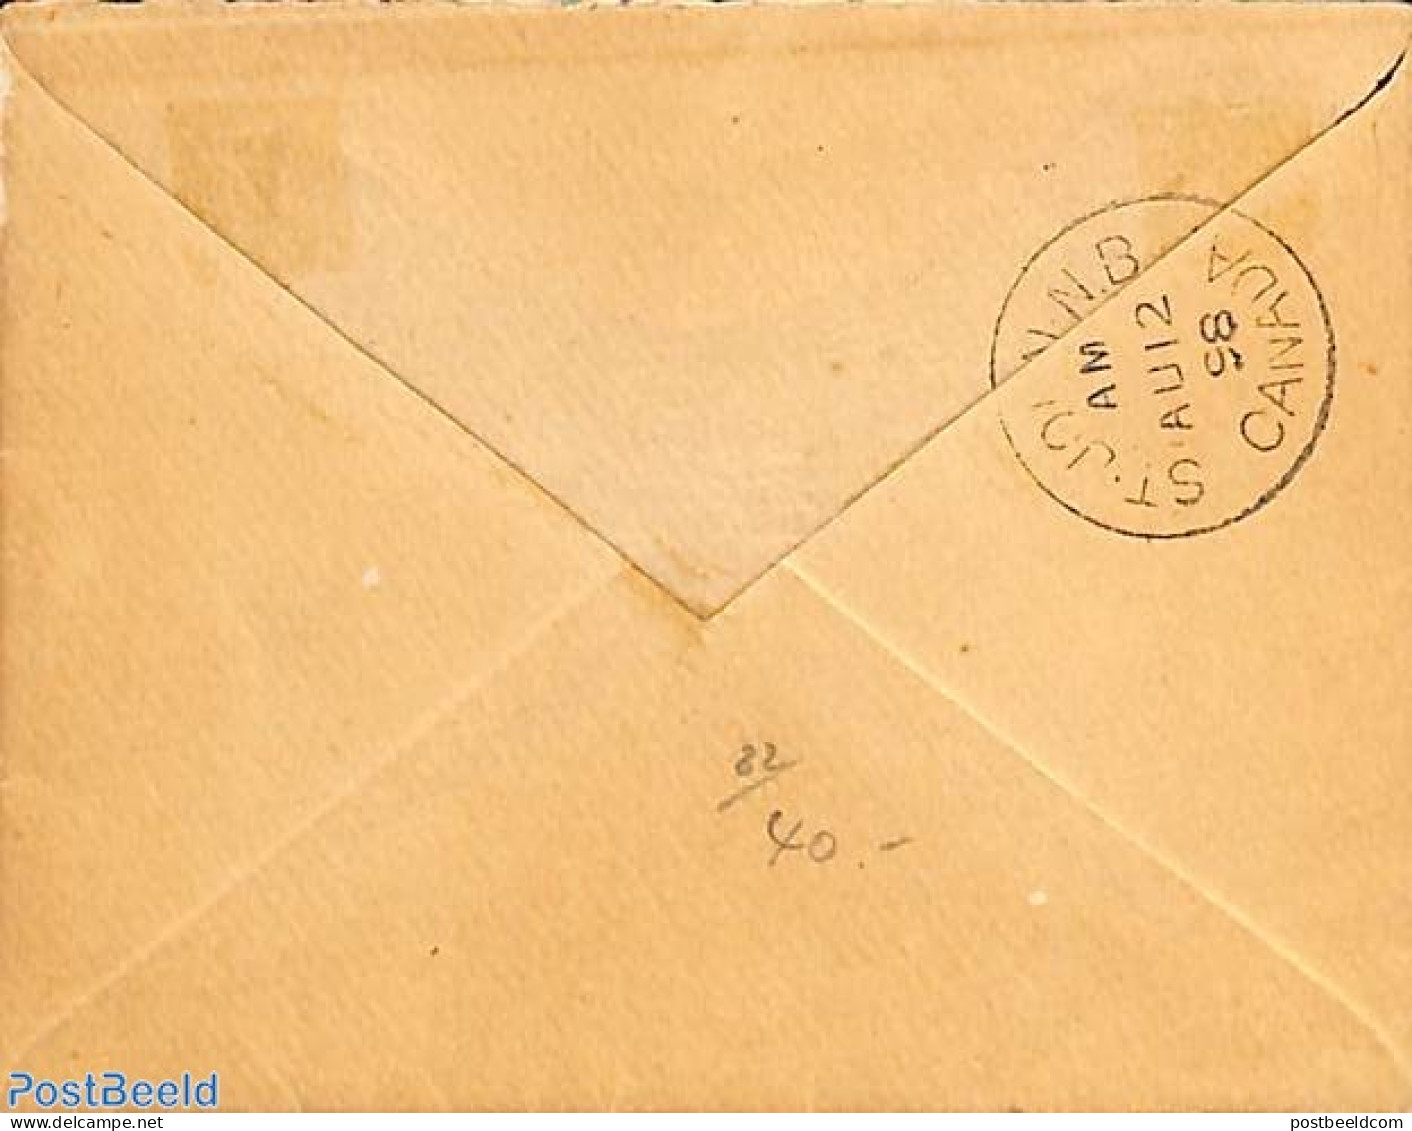 Newfoundland 1898 Letter To New Brunswick, Postal History, Various - Lighthouses & Safety At Sea - Lighthouses